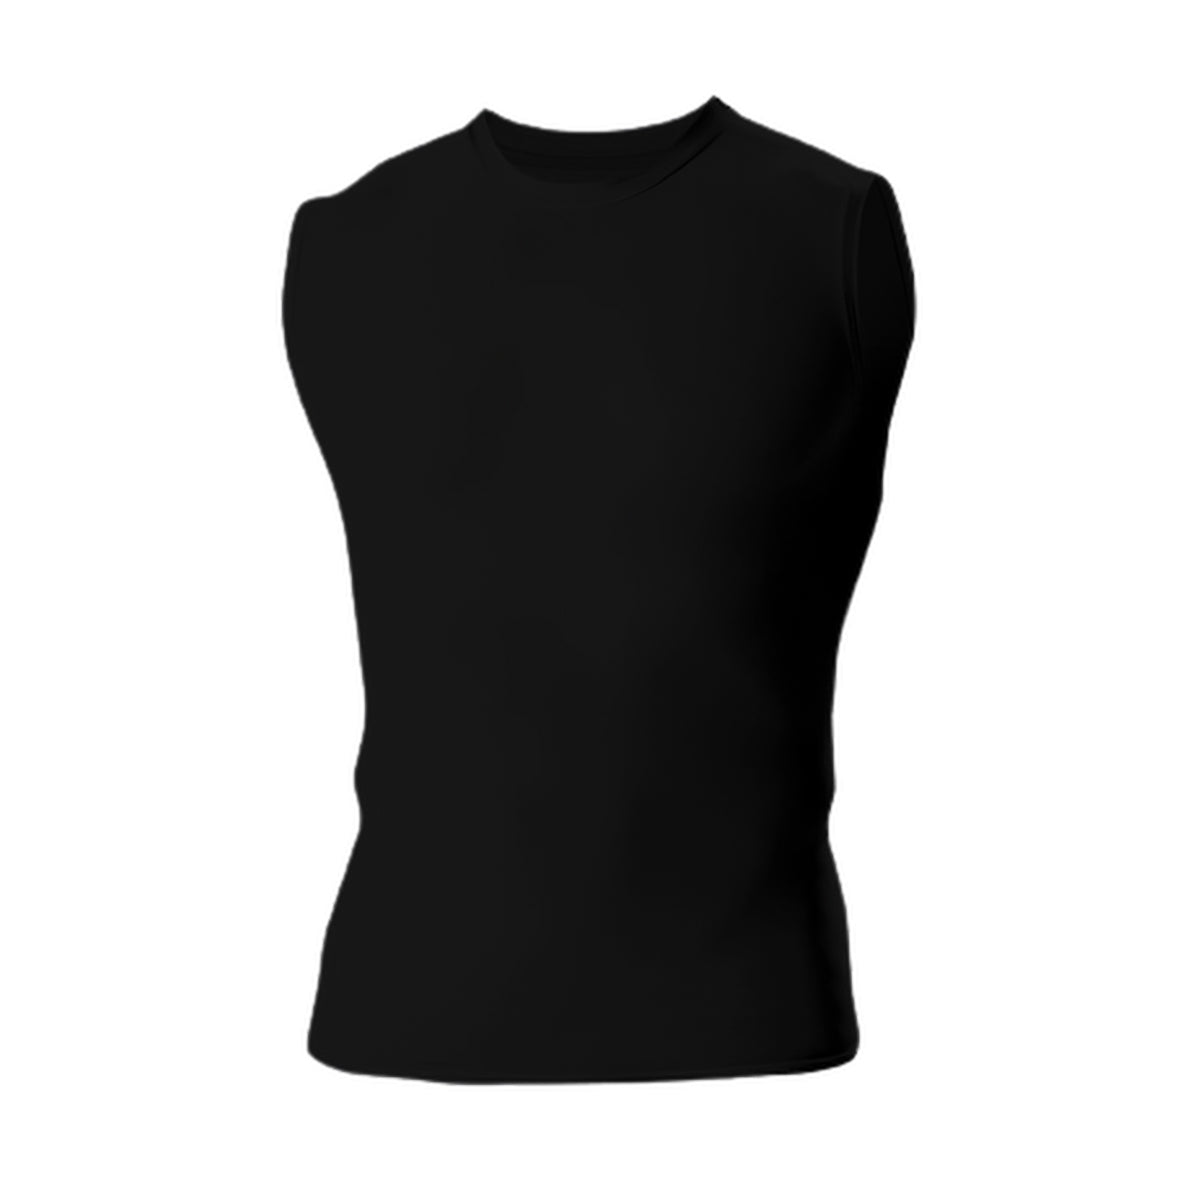 HercShirt 3.0 - The World's Cleanest Tank Top